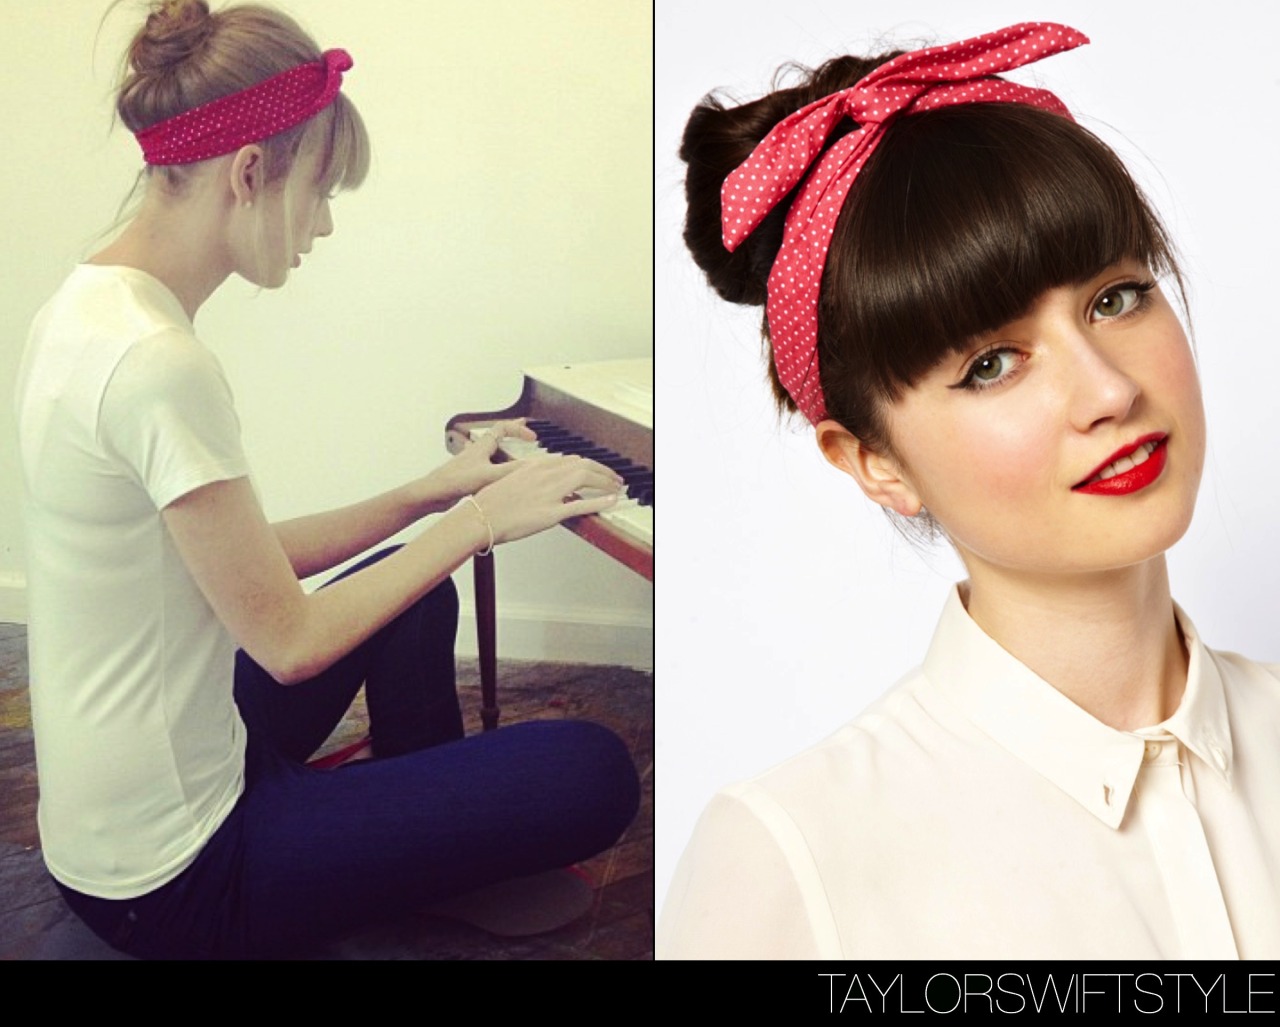 At an unknown photoshoot via Instagram | March 1, 2013Johnny Loves Rosie &#8216;Polka Heart Wire Wrap Head Band&#8217; - $23.74 (via ASOS)Had a photo shoot. Found a tiny piano. Had a tiny jam session.